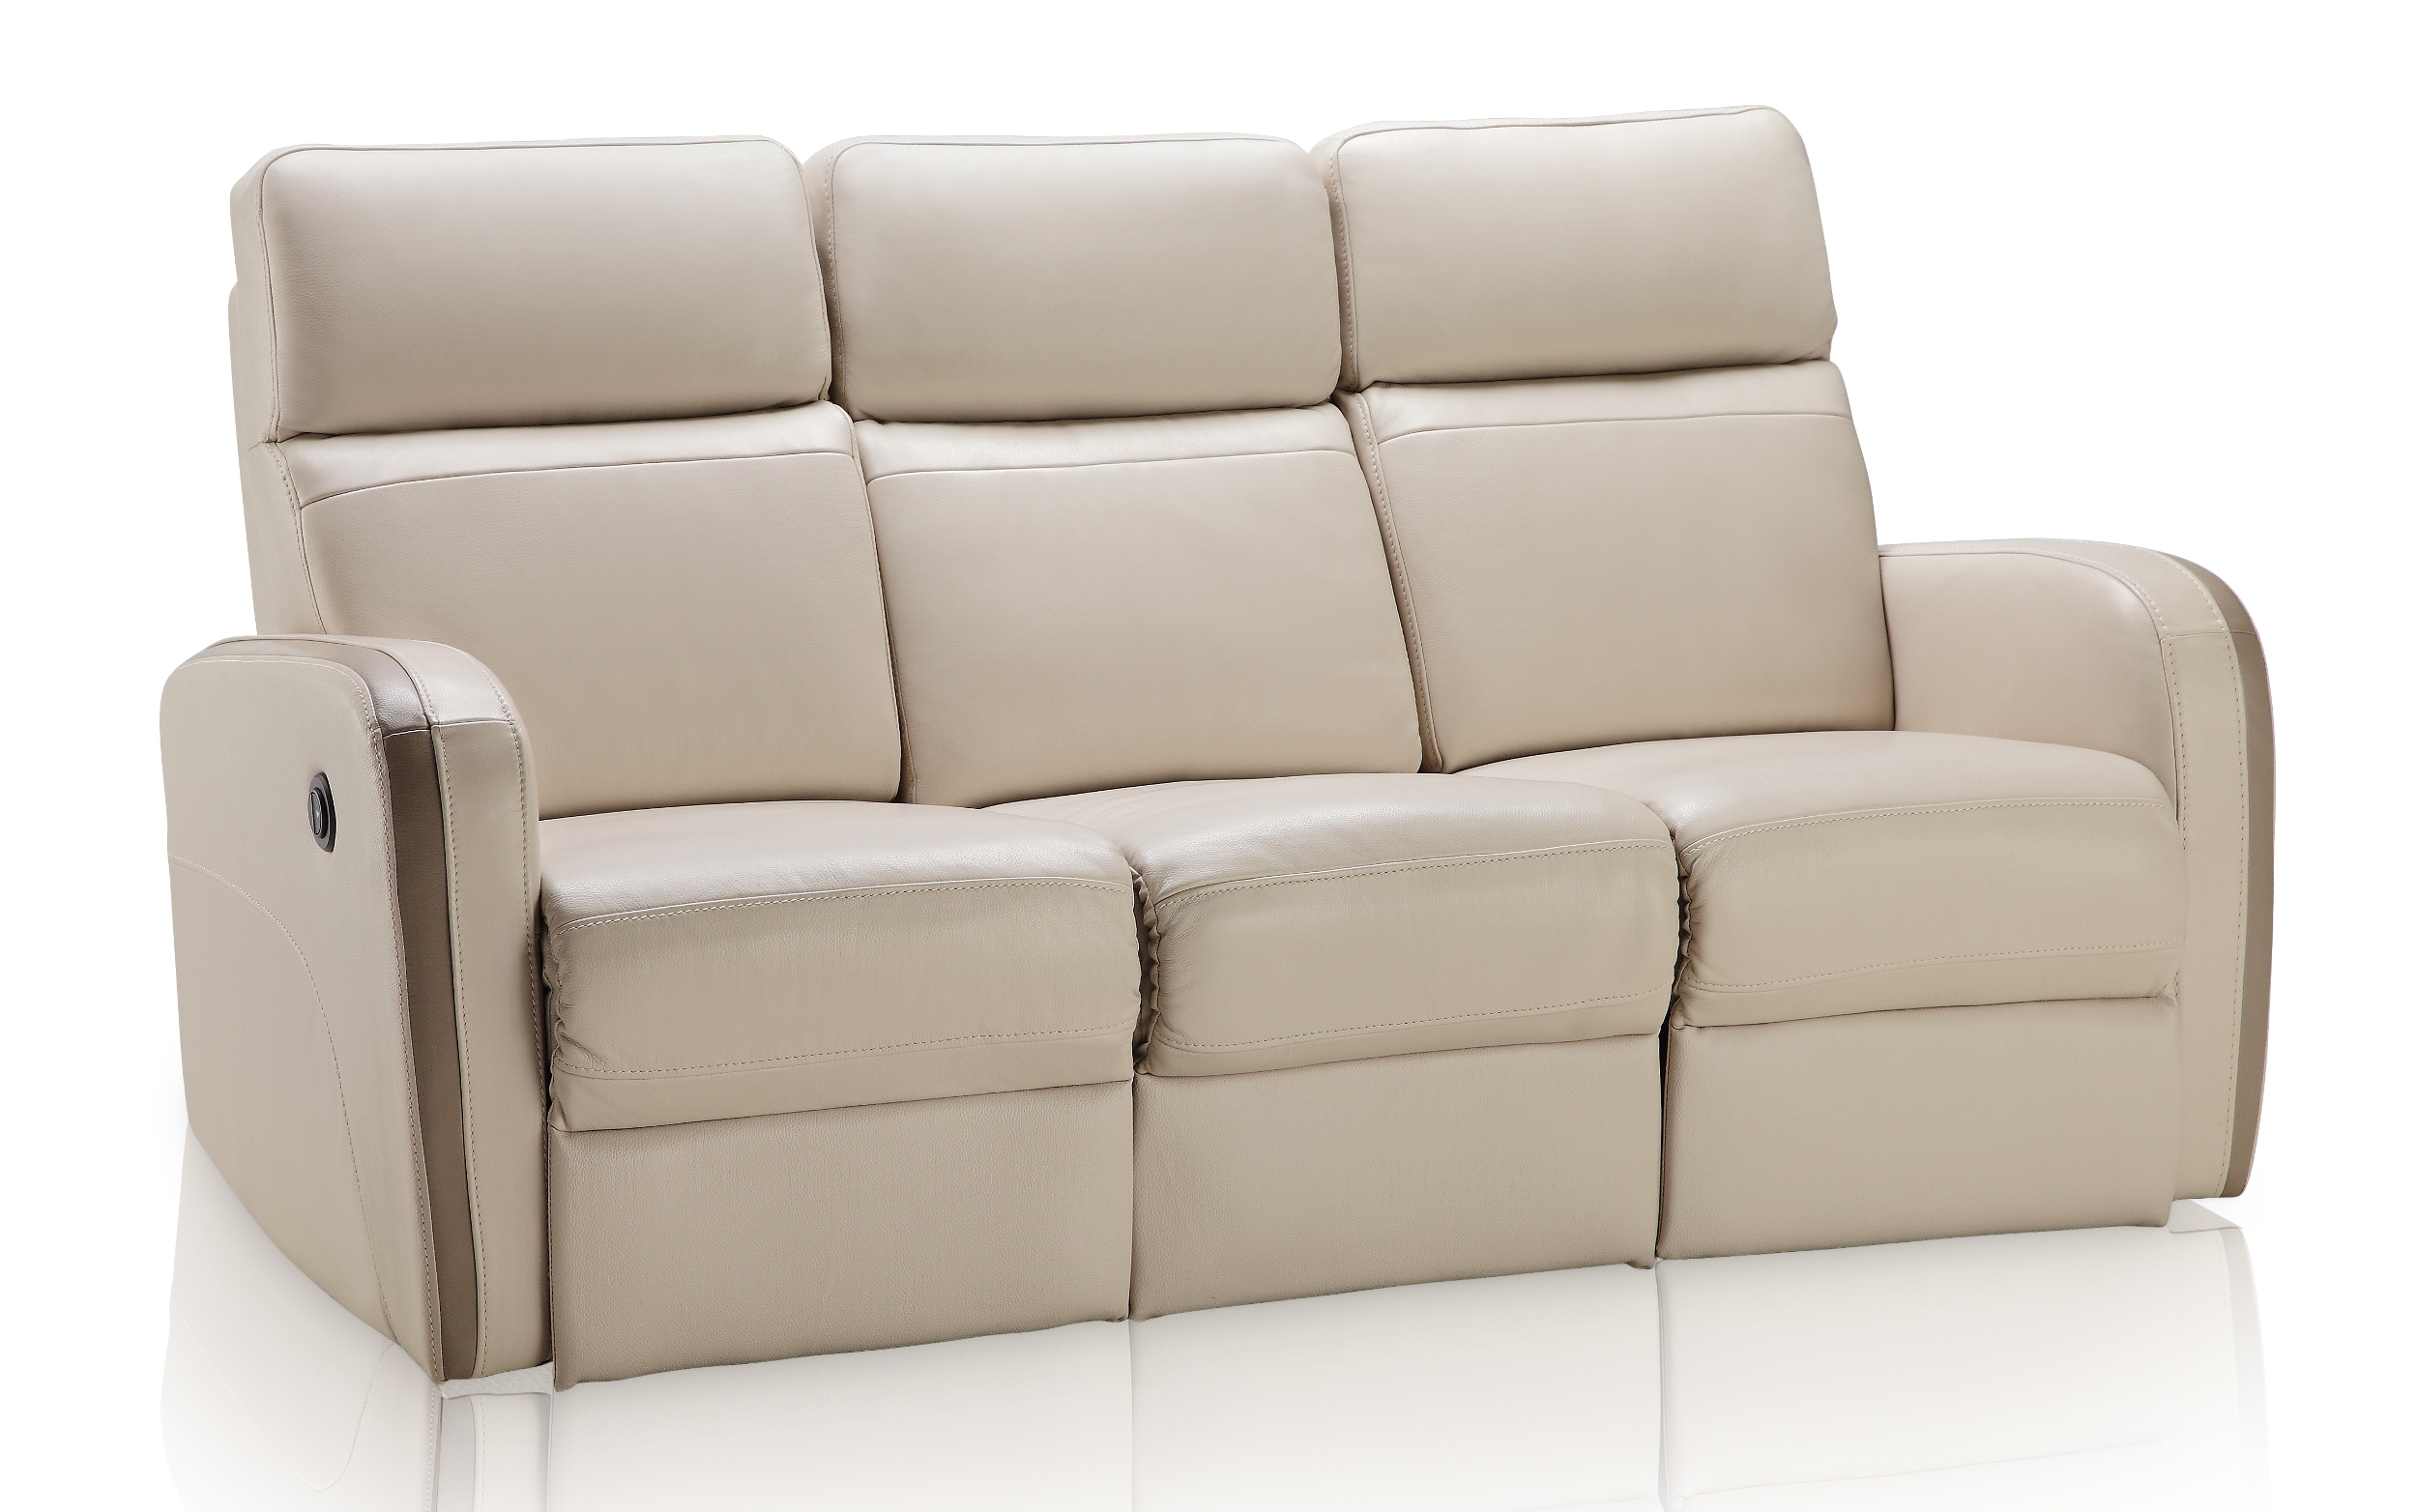 Amazing Argentina Leather Sofa With Electrical Recliners